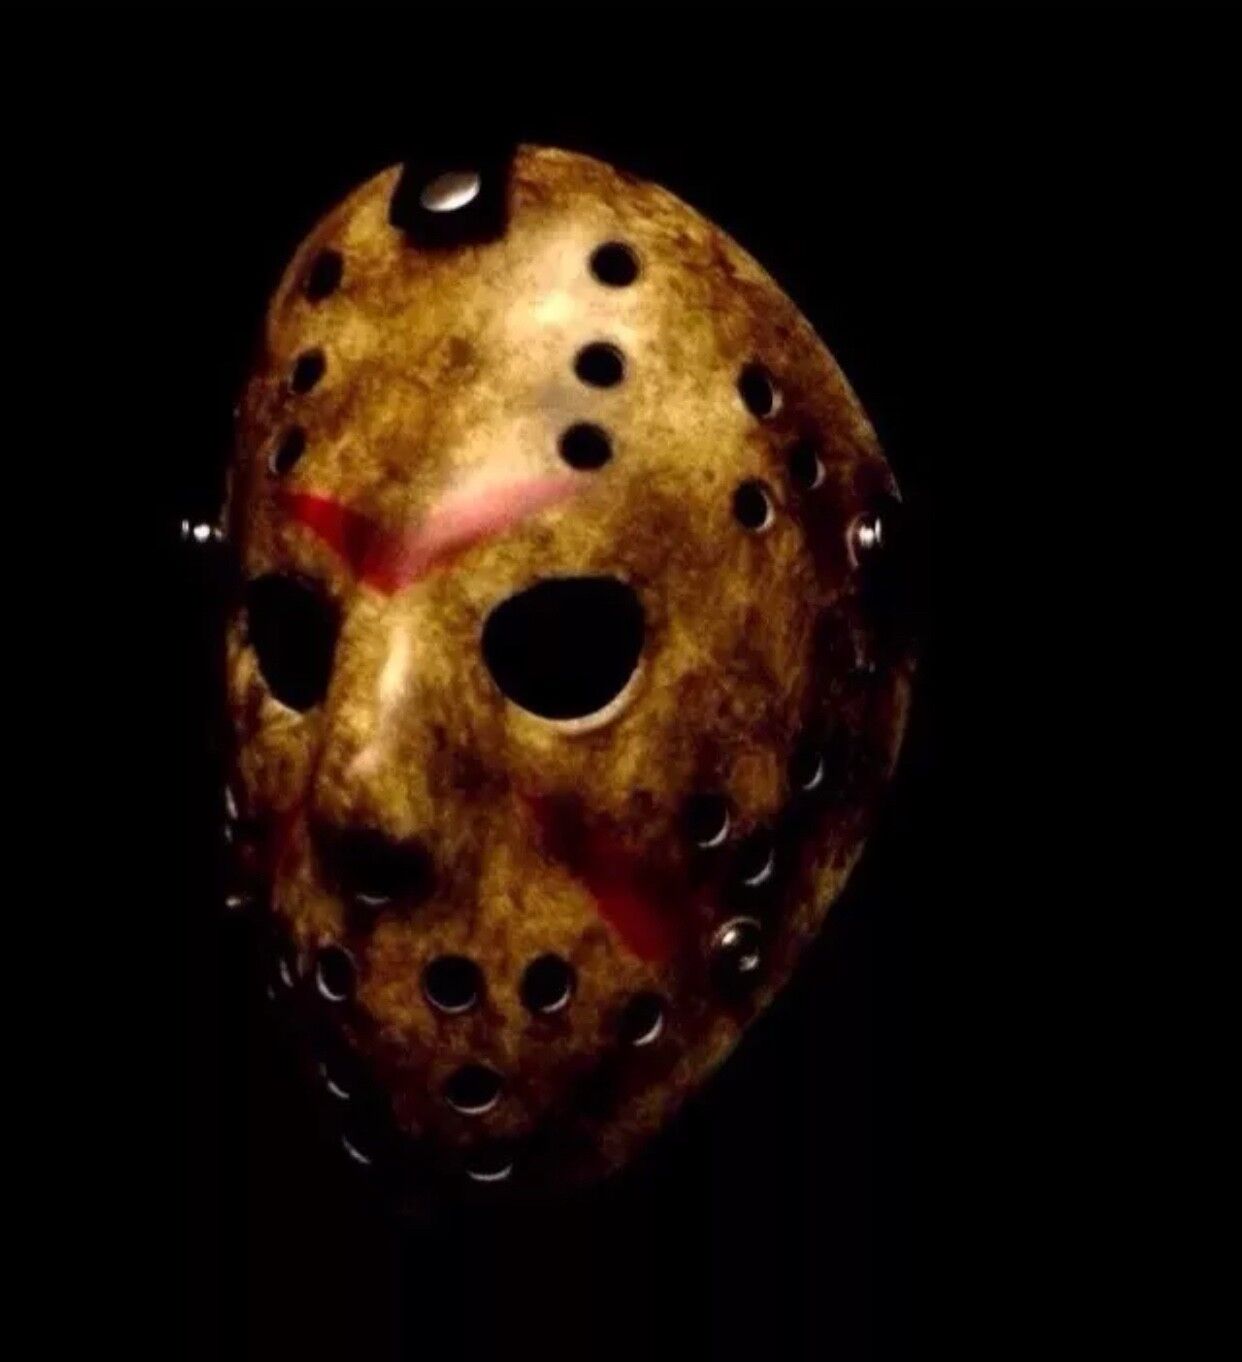 Friday The 13th Hockey Mask Costume Jason Voorhees Horror USA SELLER FAST SHIP